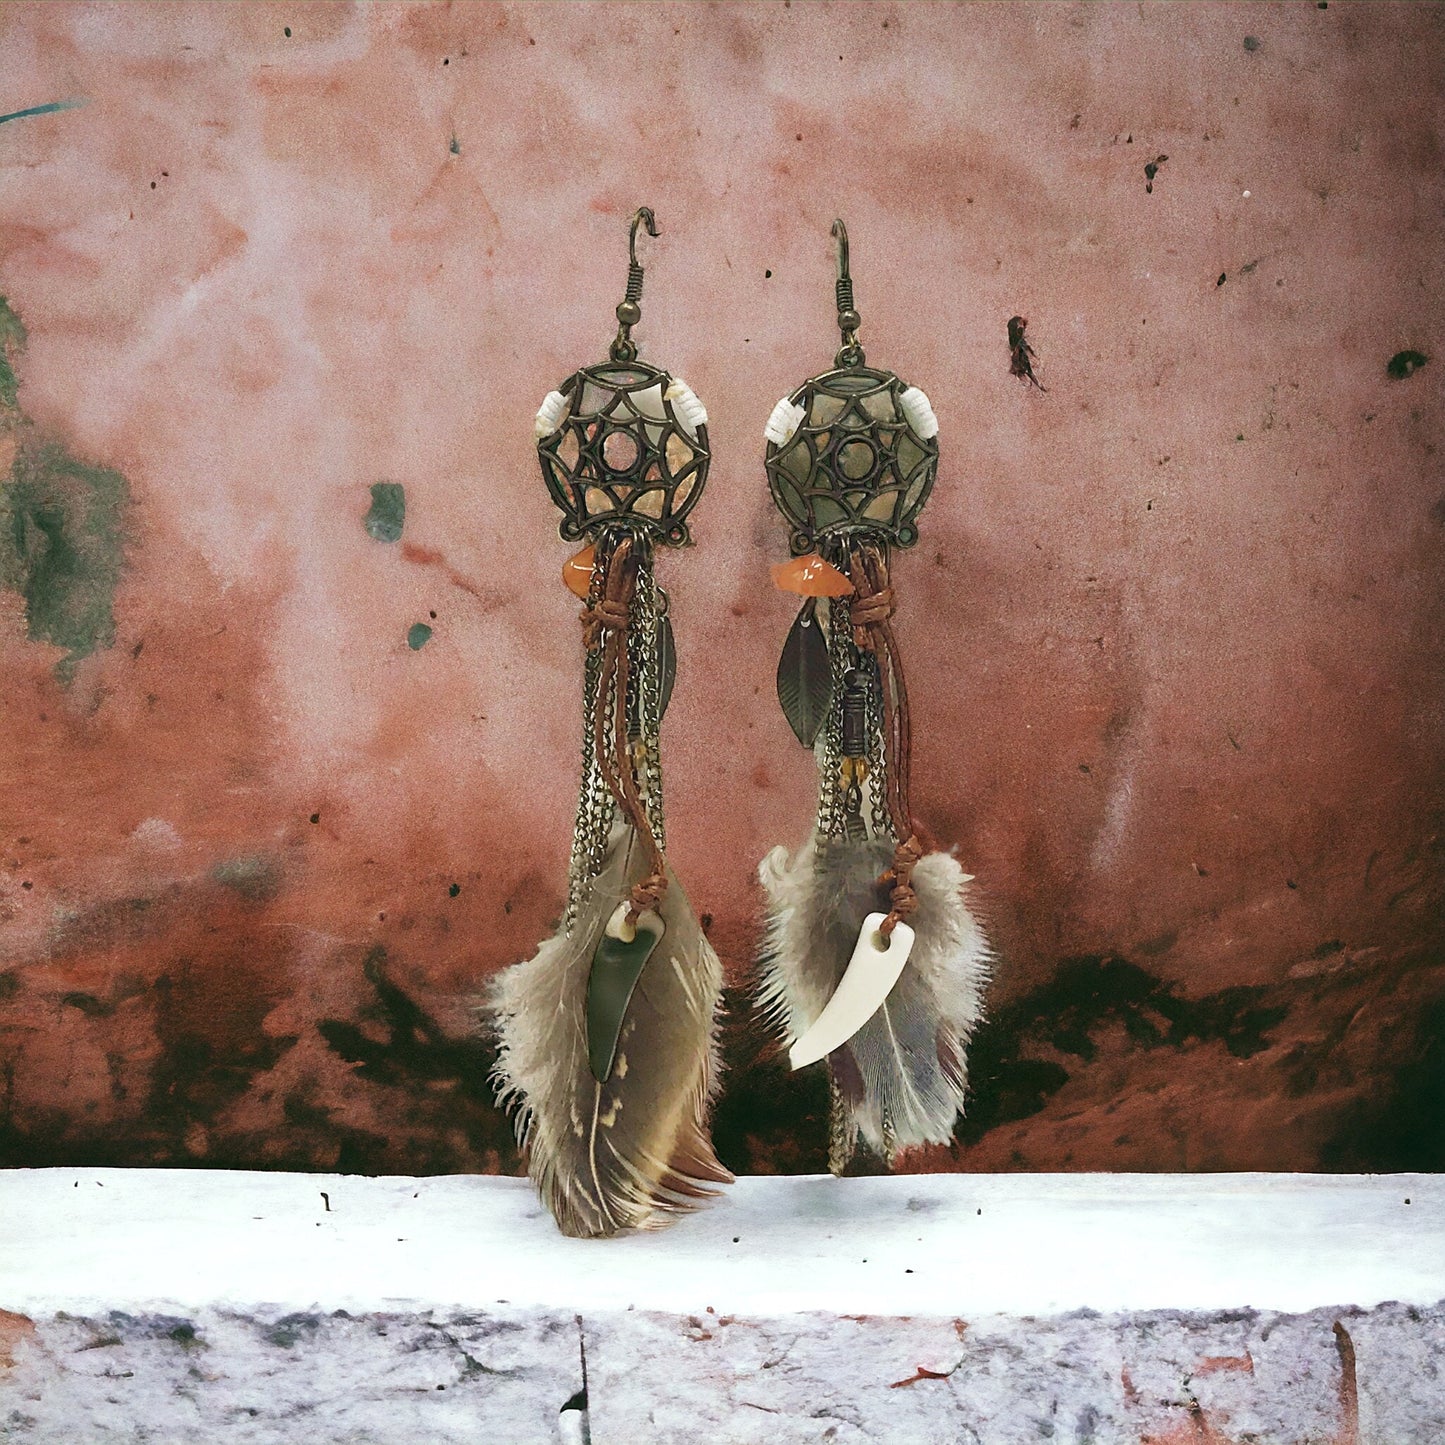 Dream Catcher Bohemian Feather Dangle Earrings: Free-Spirited Accents for Boho-Chic Looks